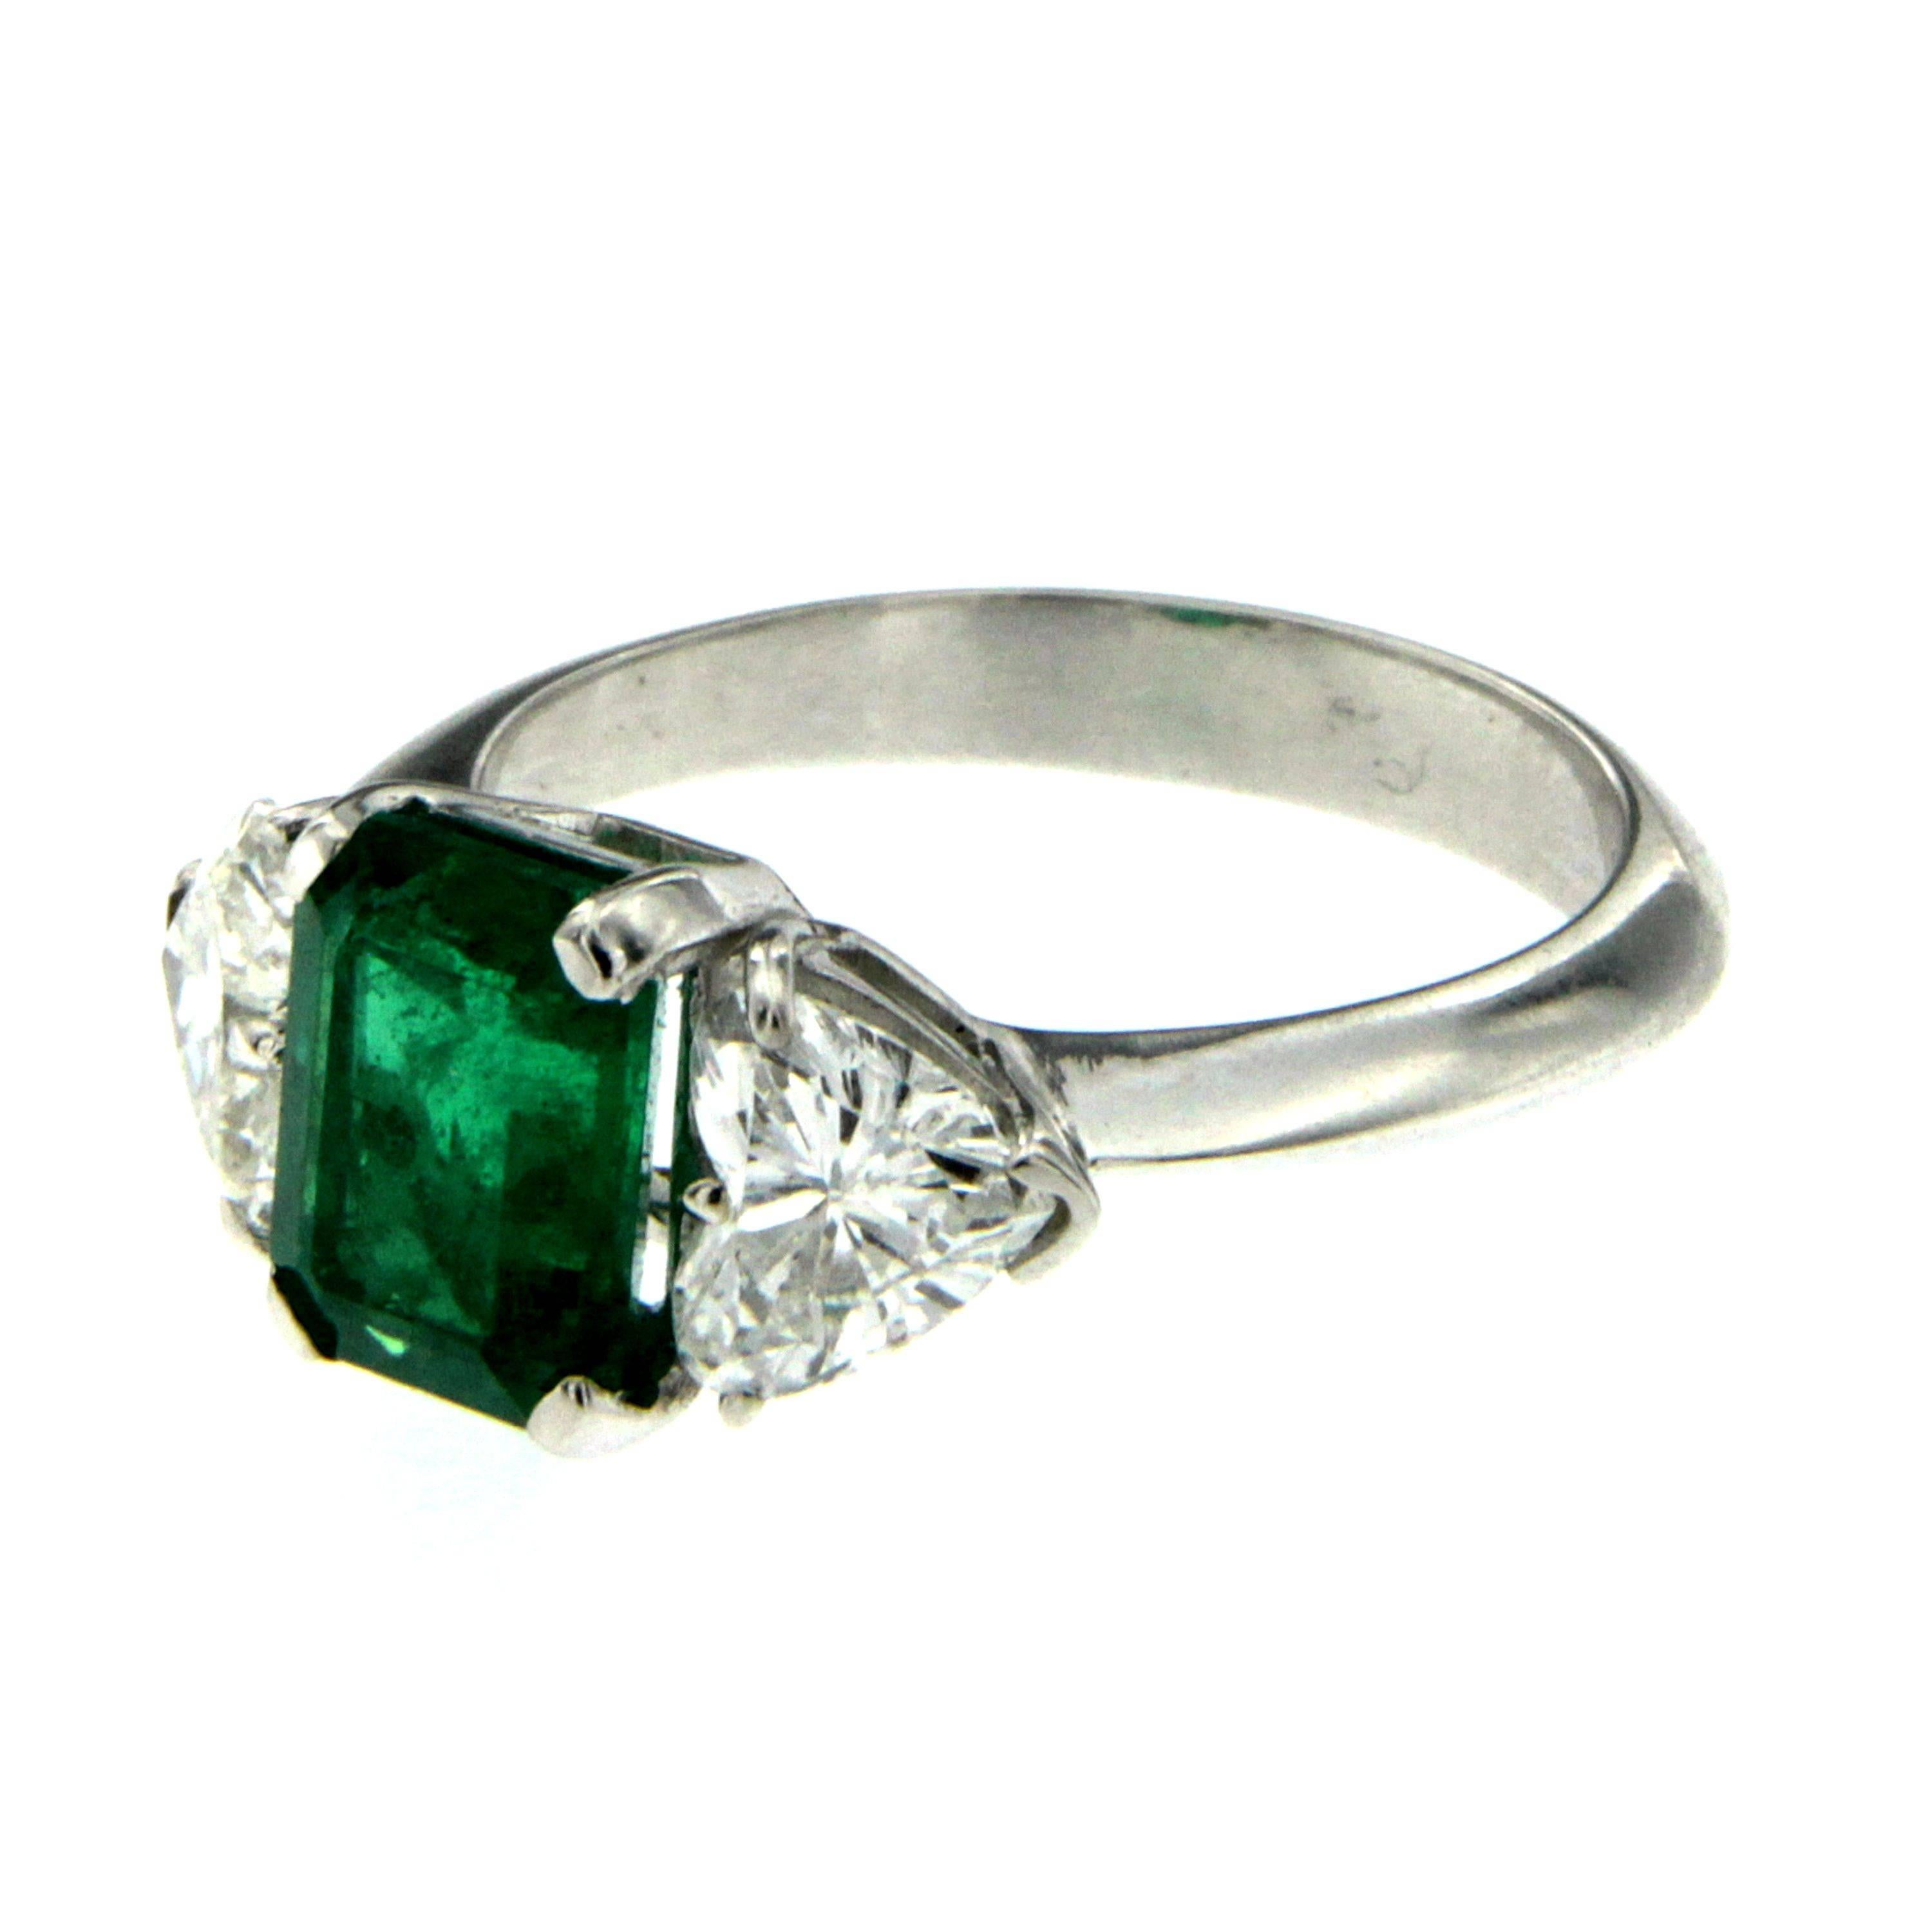 This luxurious cocktail ring is set in 18k white Gold and exposes at the center a 2.09ct octagonal mixed-cut Colombian Emerald with an incredible depth of color and brilliance. It is complemented by a duo heart cut  diamond approx. 2.09 cts in total